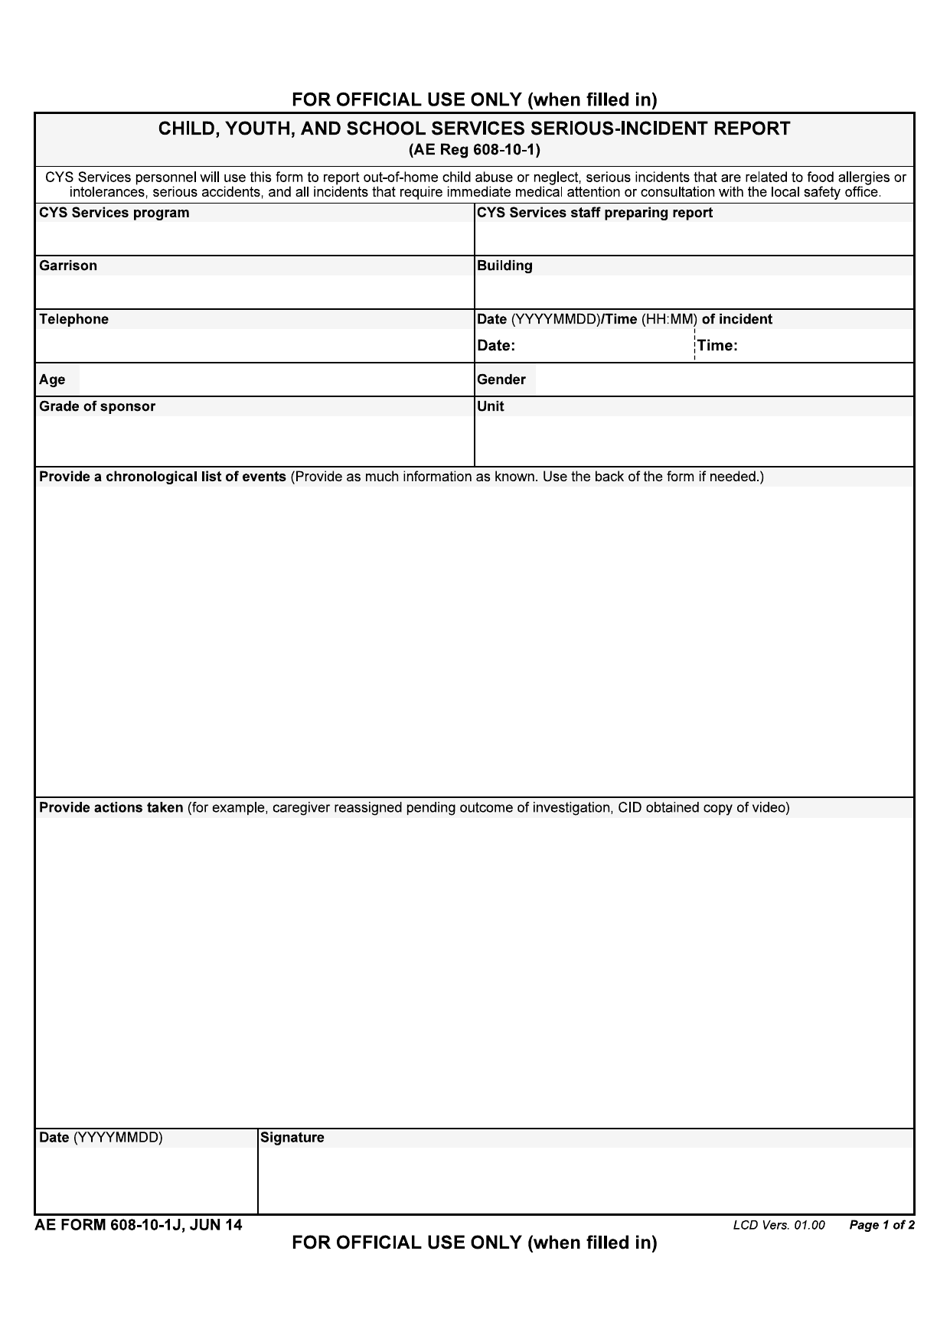 AE Form 608-10-1J Child Youth and School Services Serious-Incident Report, Page 1